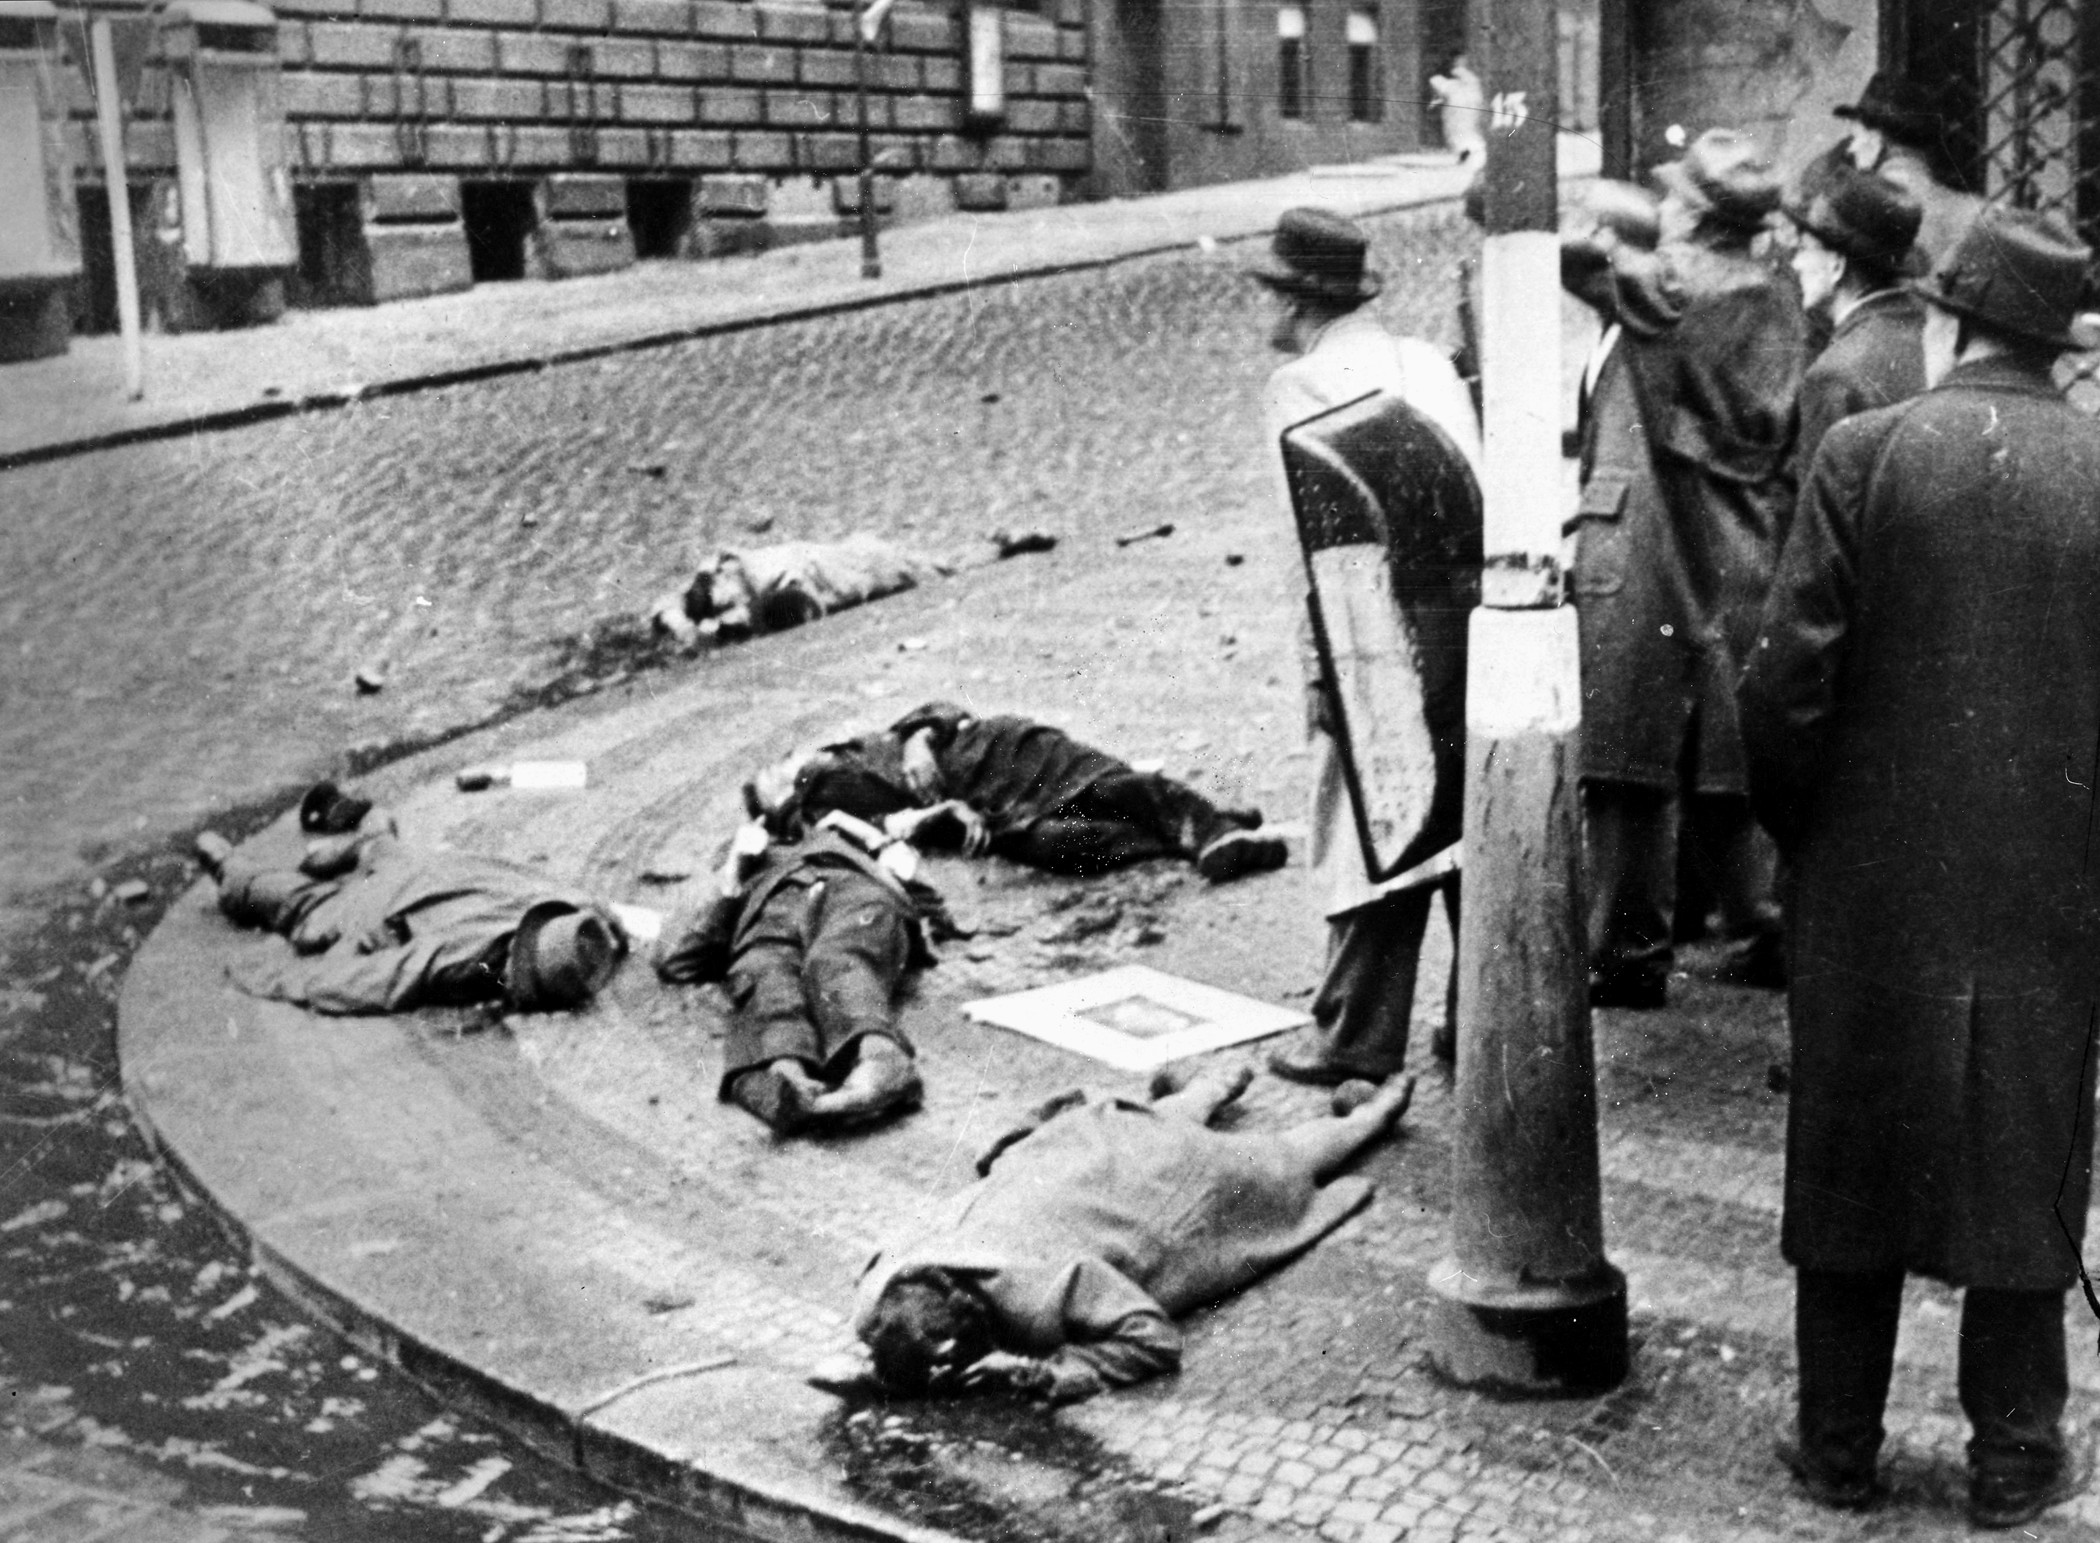 The bodies of members of the Czech Resistance lie sprawled on a Prague street corner following the uprising.